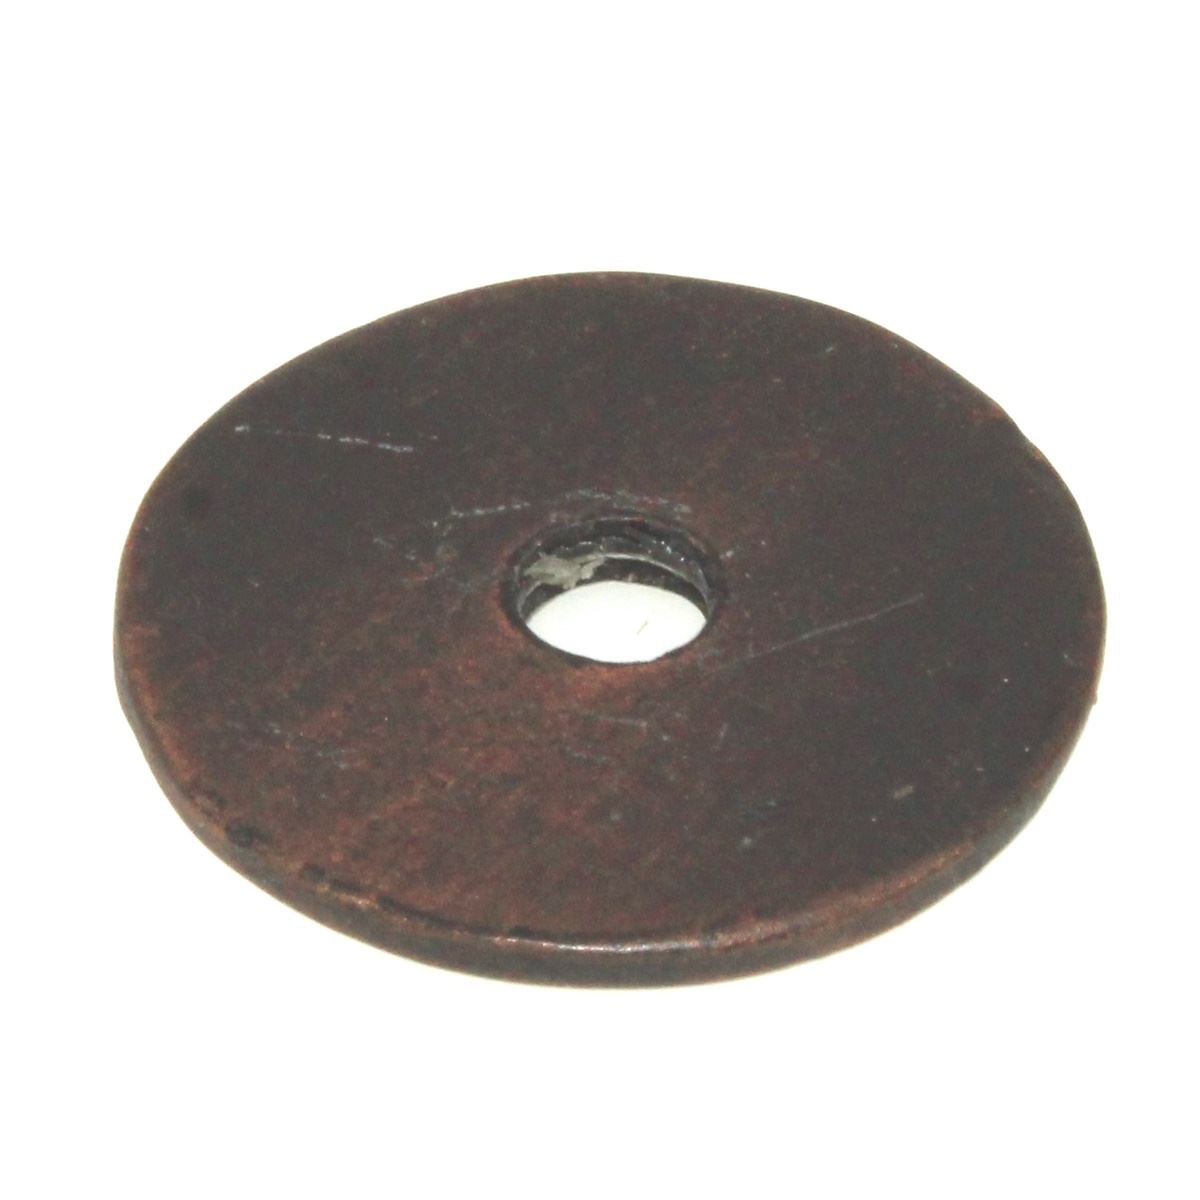 Anne at Home Rustic Sonnet 1" Cabinet Knob Backplate Antique Copper 1305-16